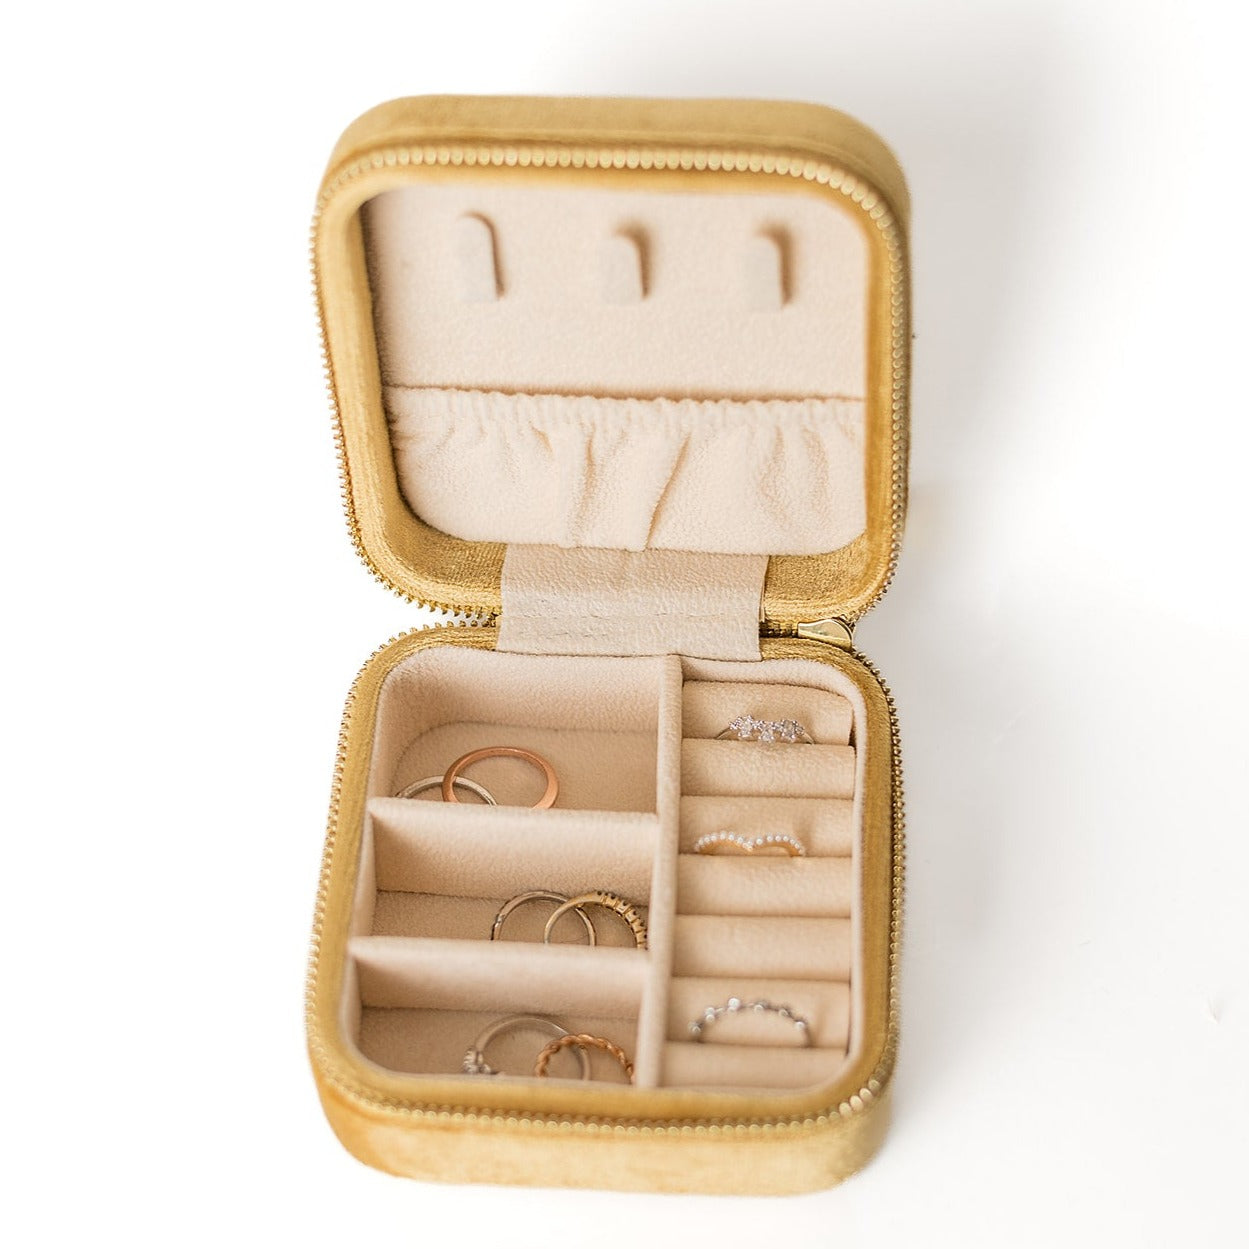 The inside of a mustard-coloured jewelry case. There are three storage sections and seven ring slots on the bottom portion of the case. On the top half, there are three hooks for chains or necklaces and well as a pouch to tuck them in.